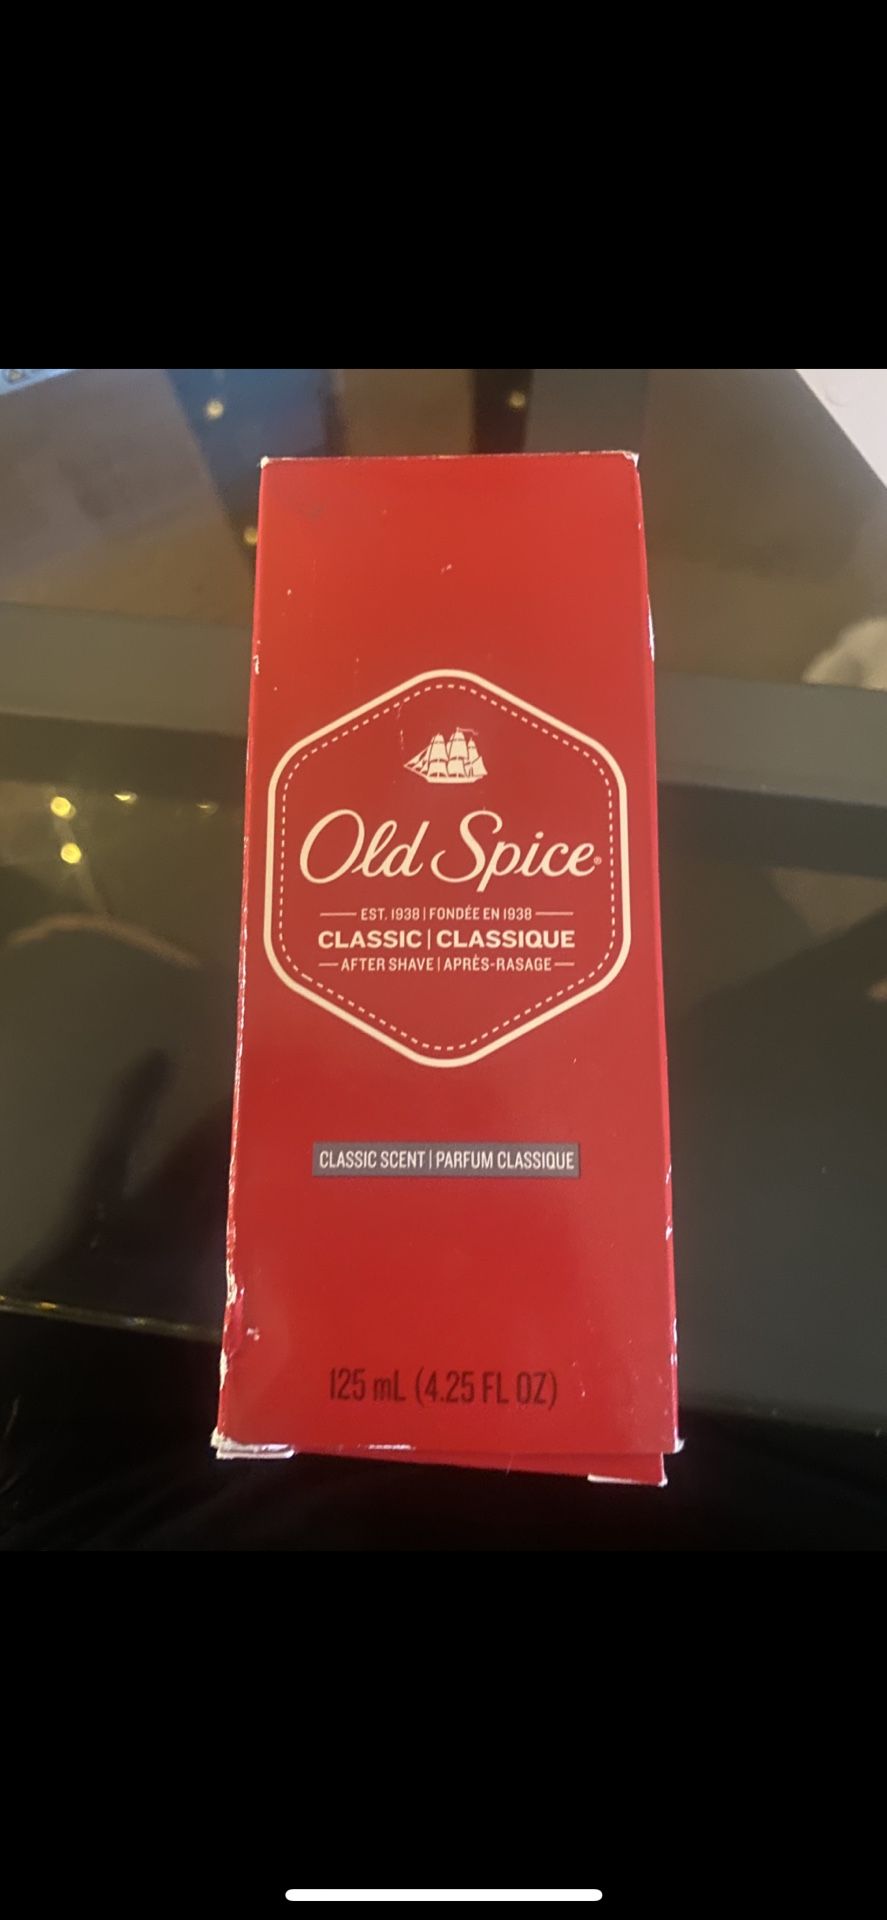 ALL OLD SPICE PRODUCTS. $5